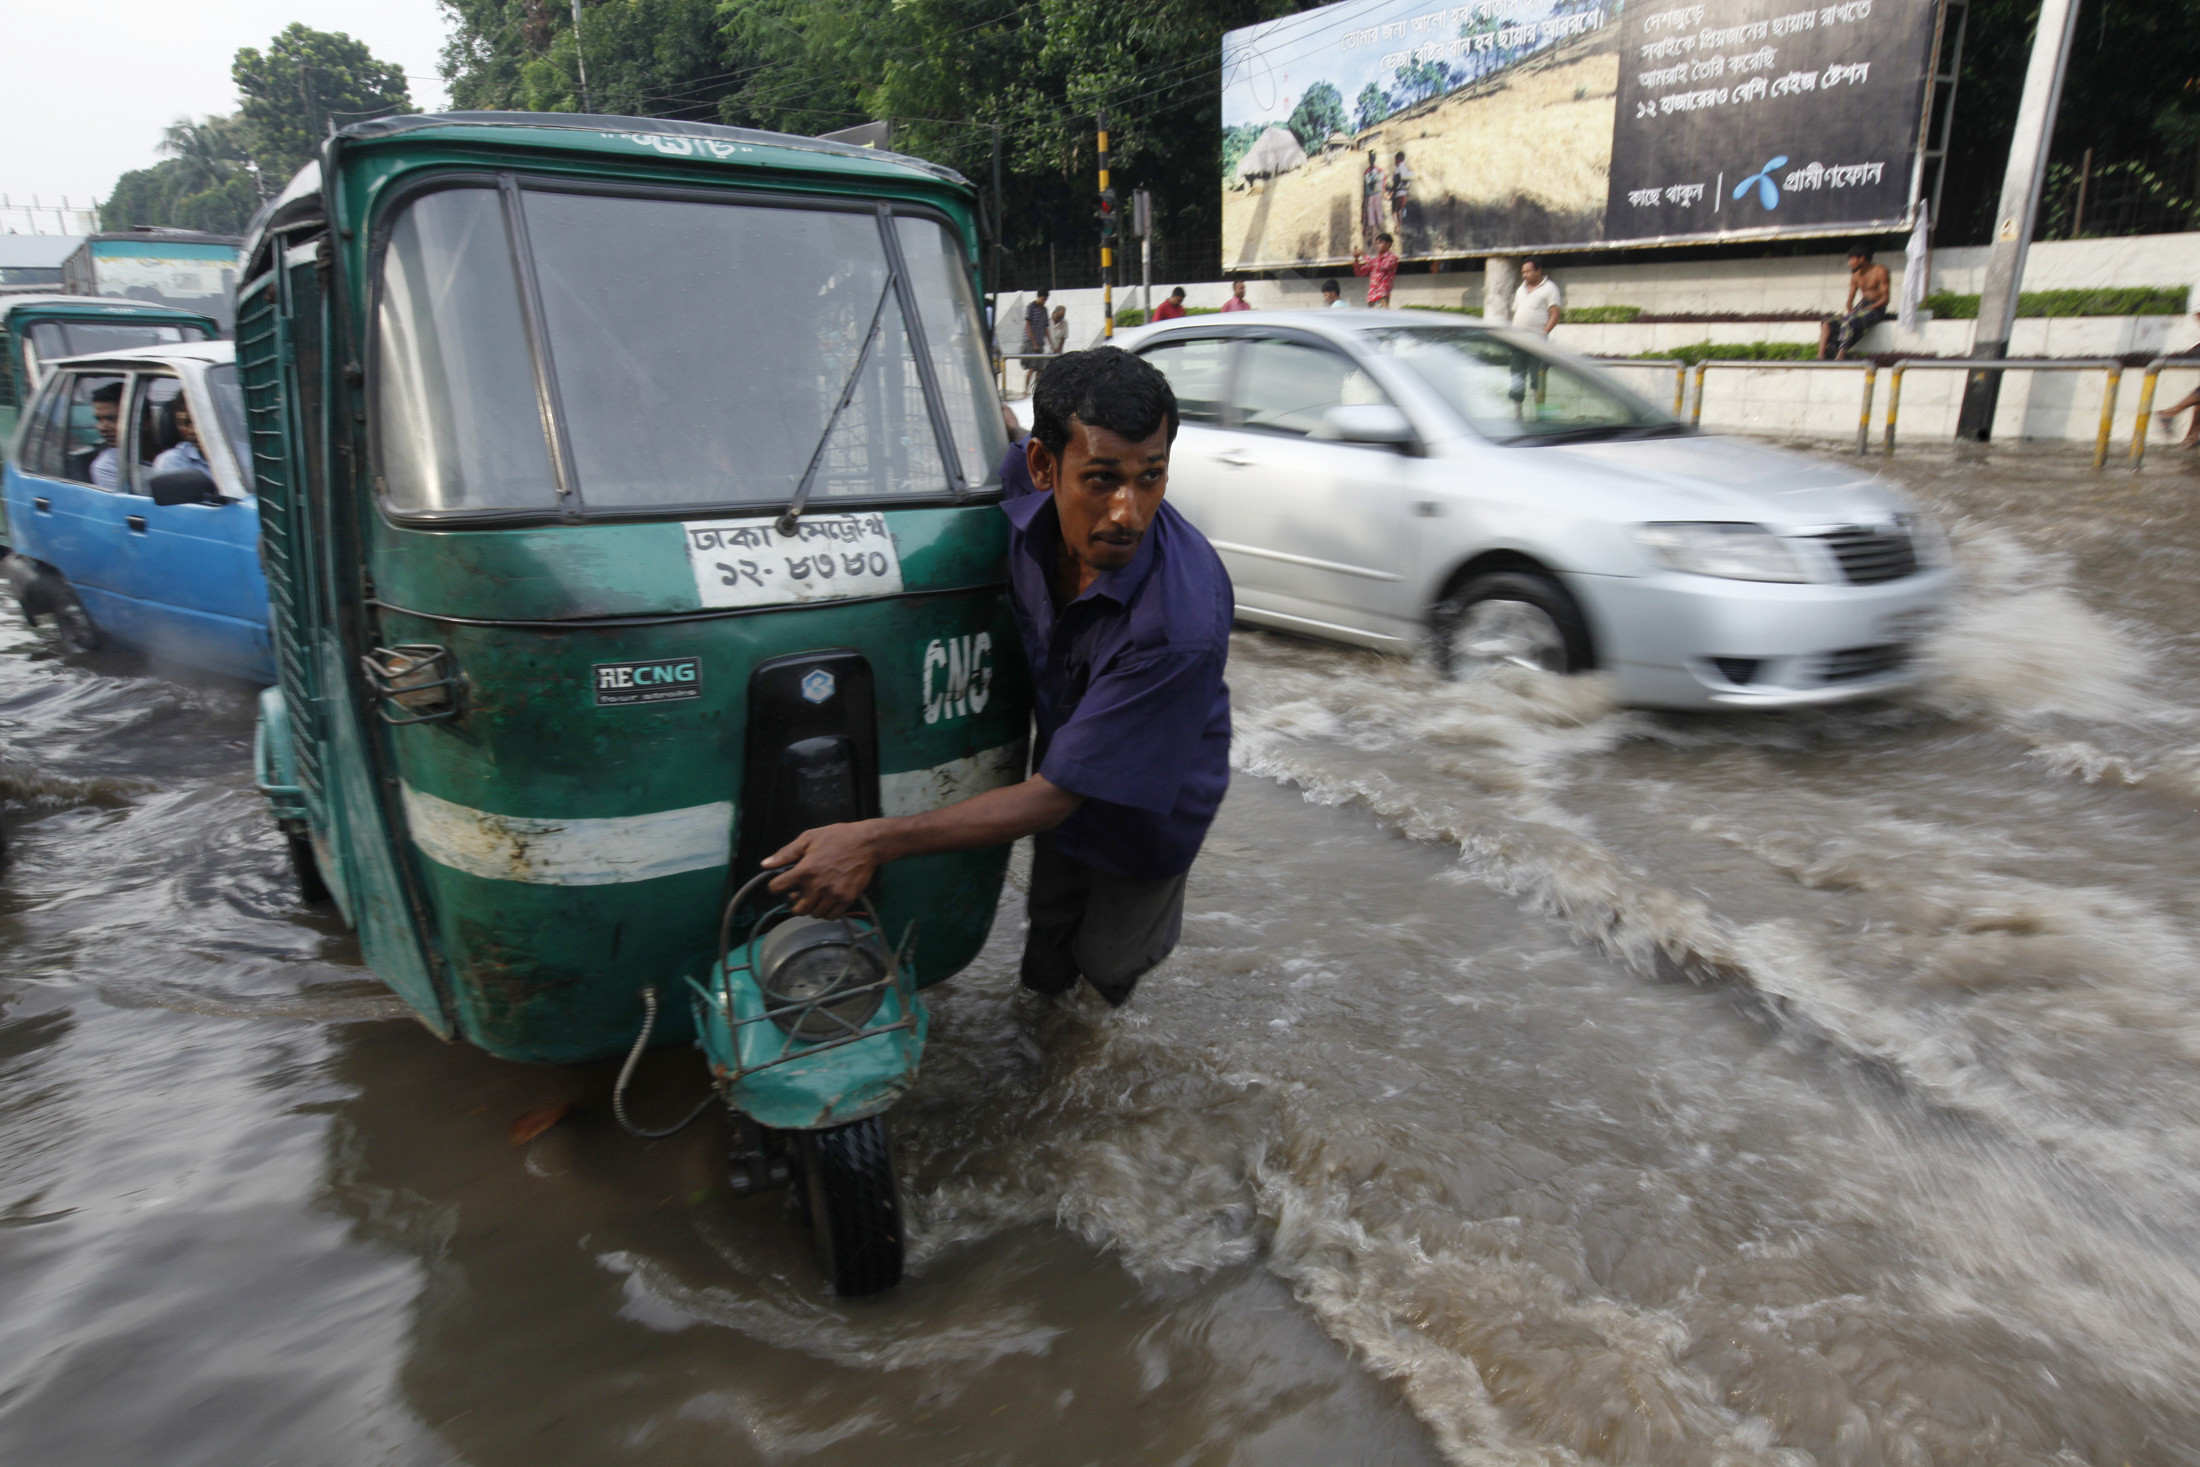 6 cities around the world at risk of flooding